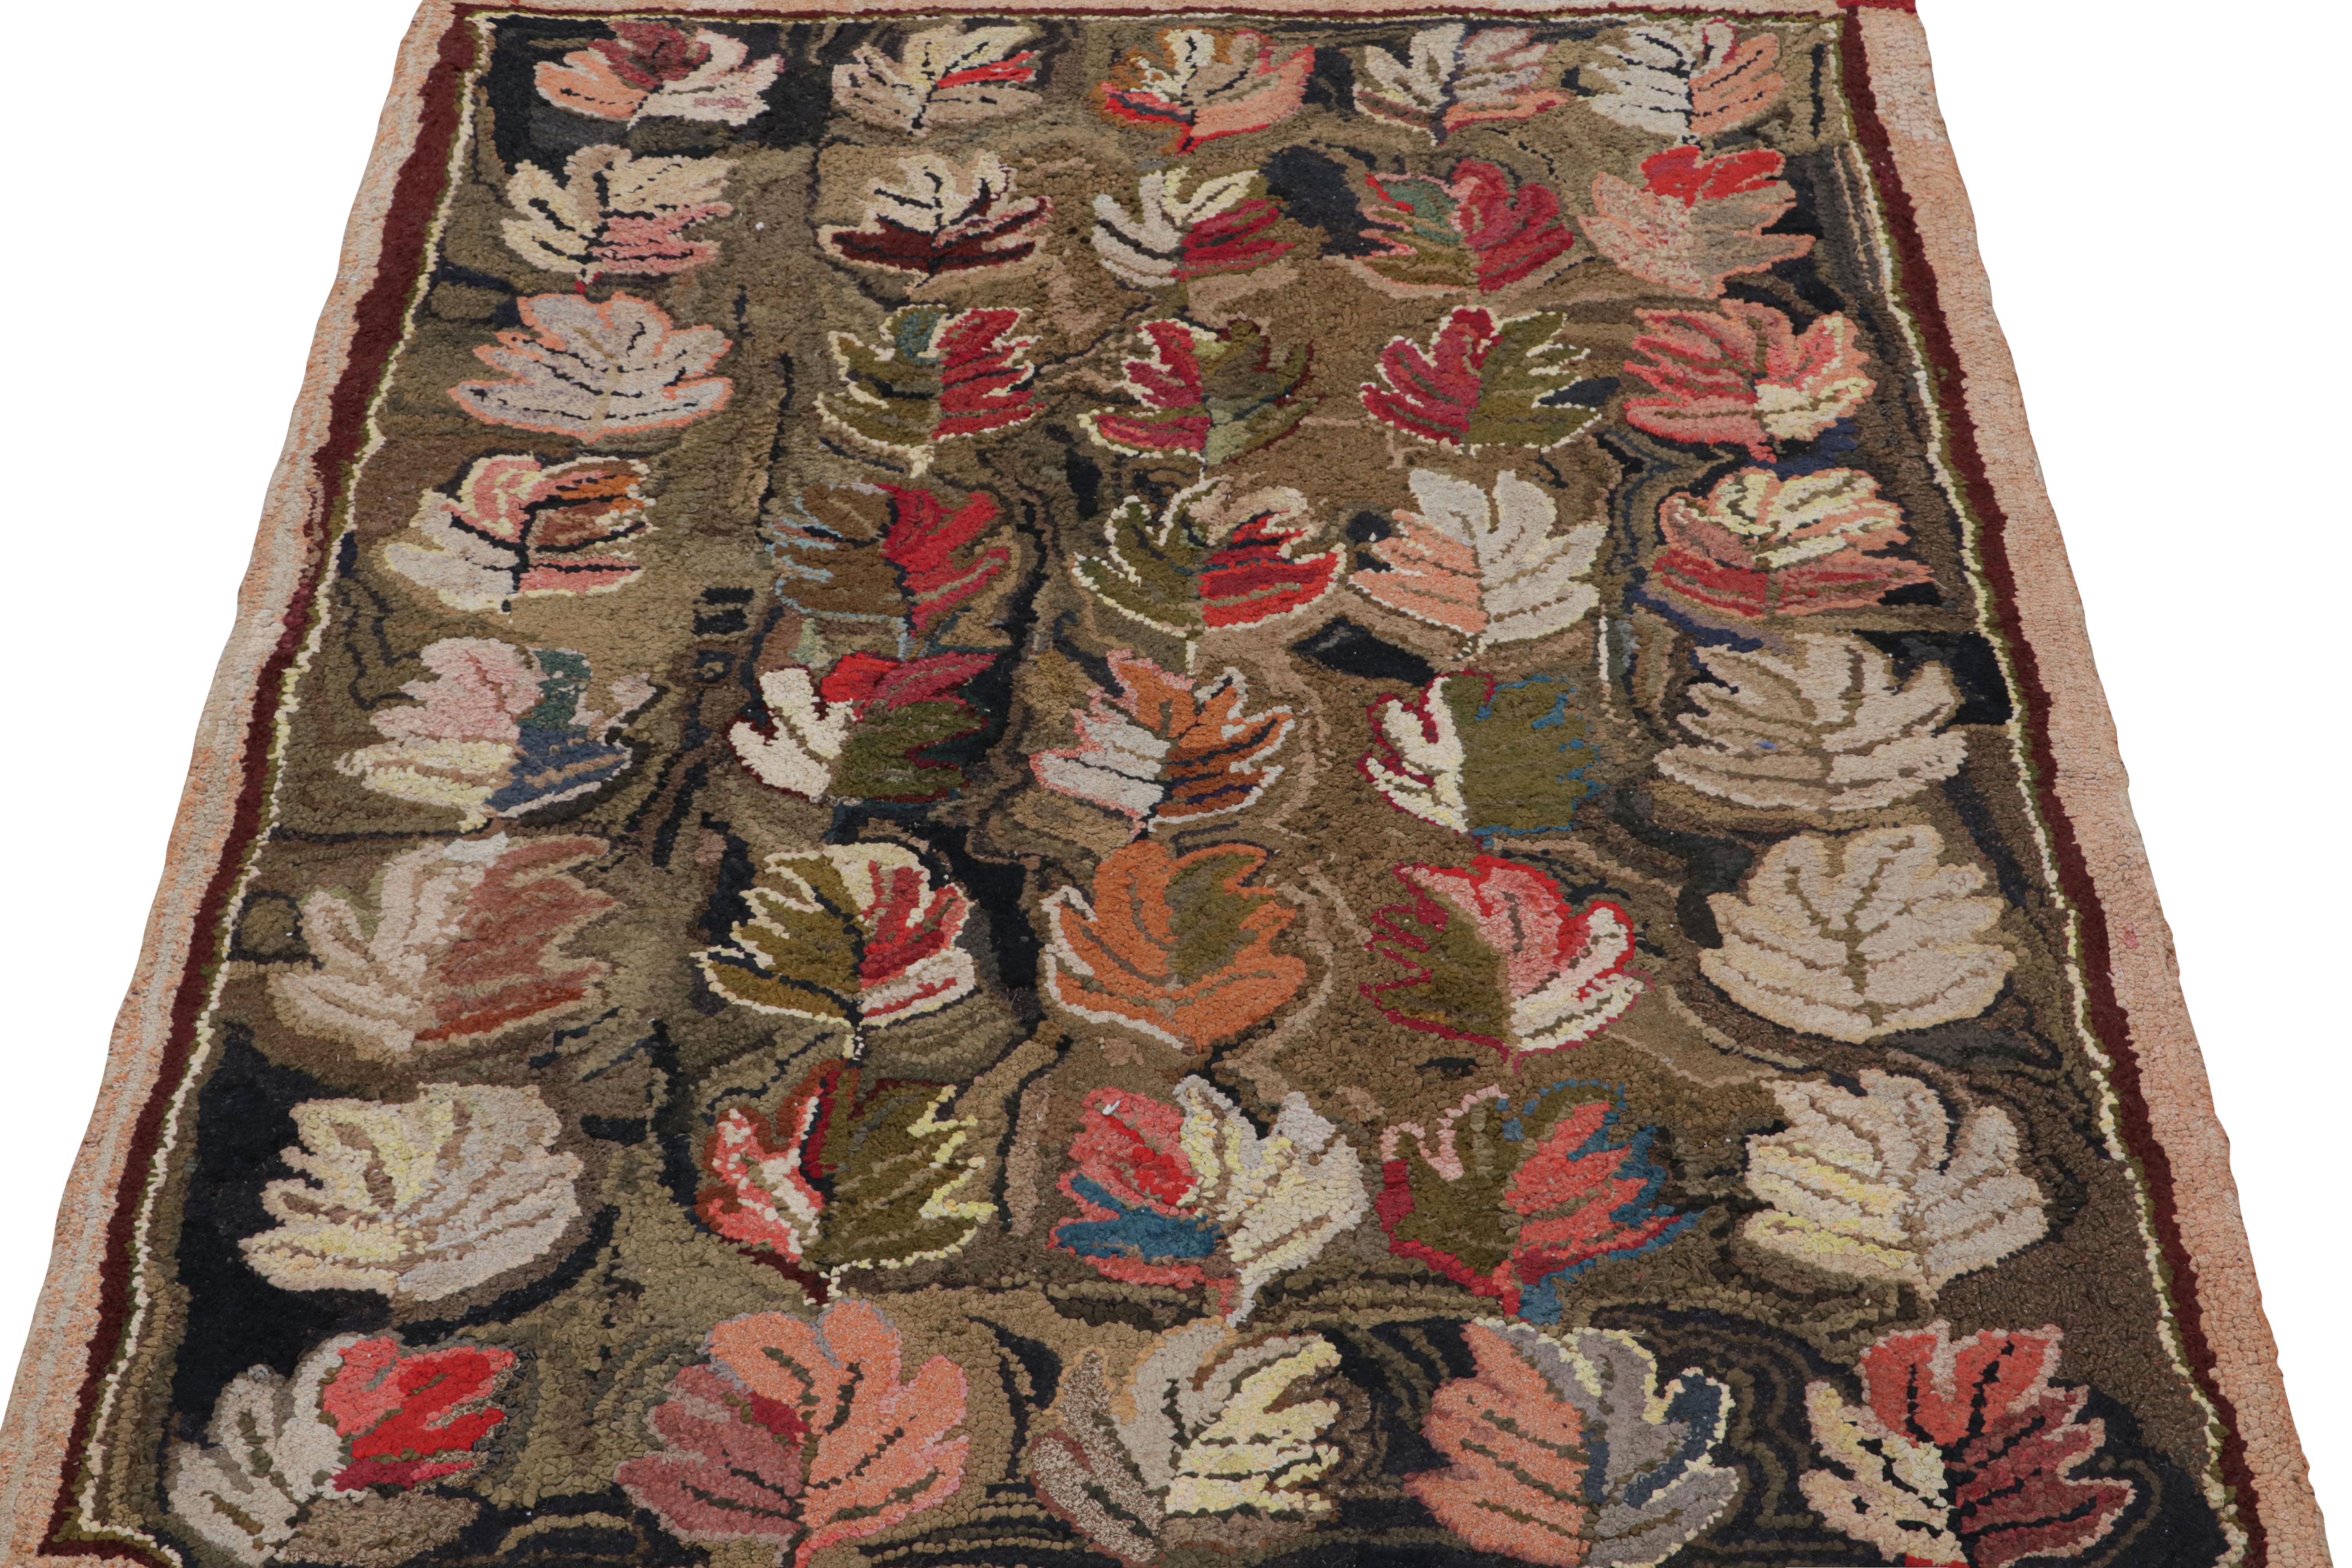 American Antique Hooked Rug in Green and Brown with Leaf Floral Pattern, from Rug & Kilim For Sale